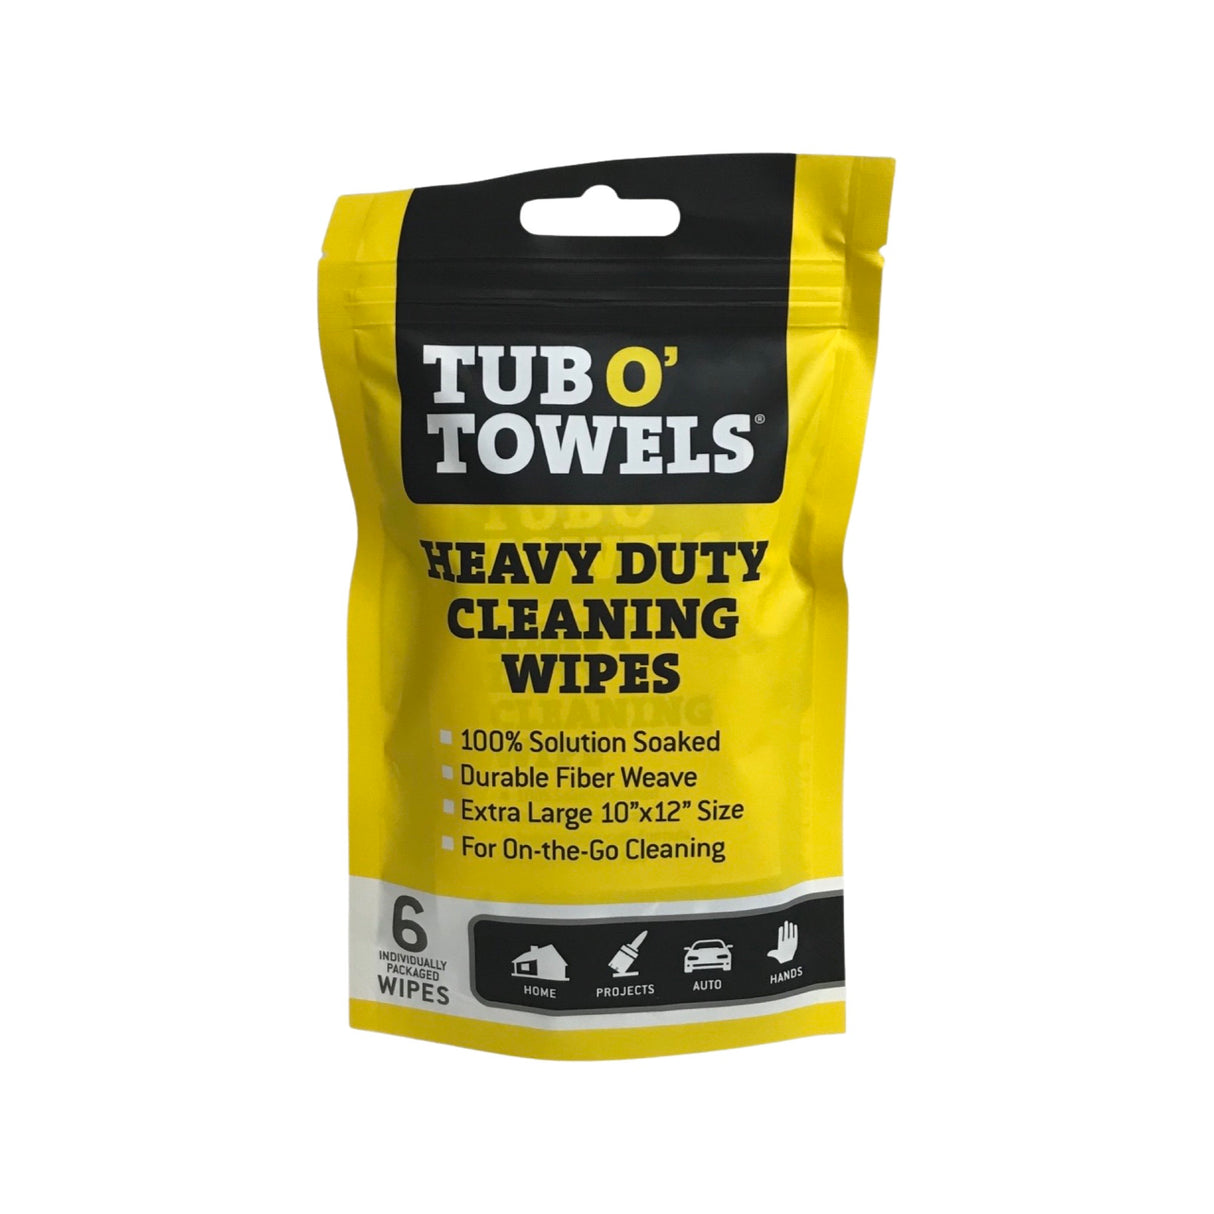 Tub O' Towels TW01-6 - 4 Pack Heavy Duty Multi-Surface Cleaning Wipes - Resealable 6 pack